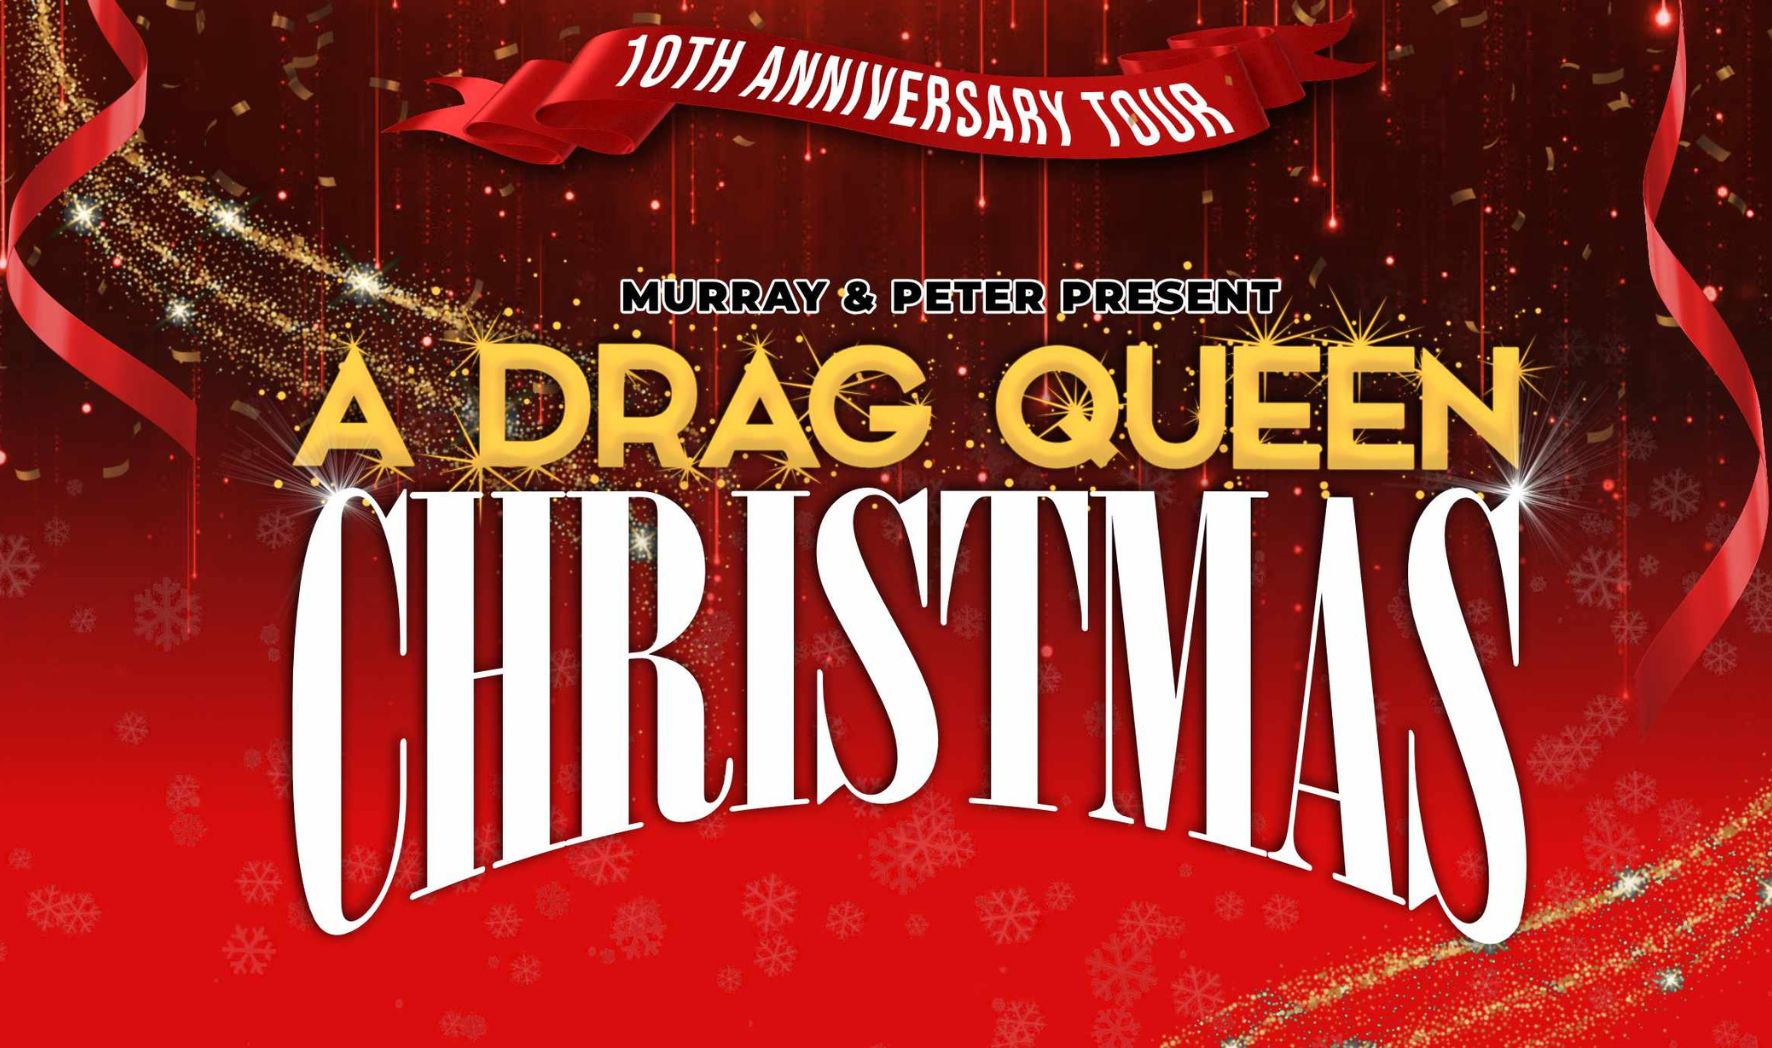 More Info for A Drag Queen Christmas